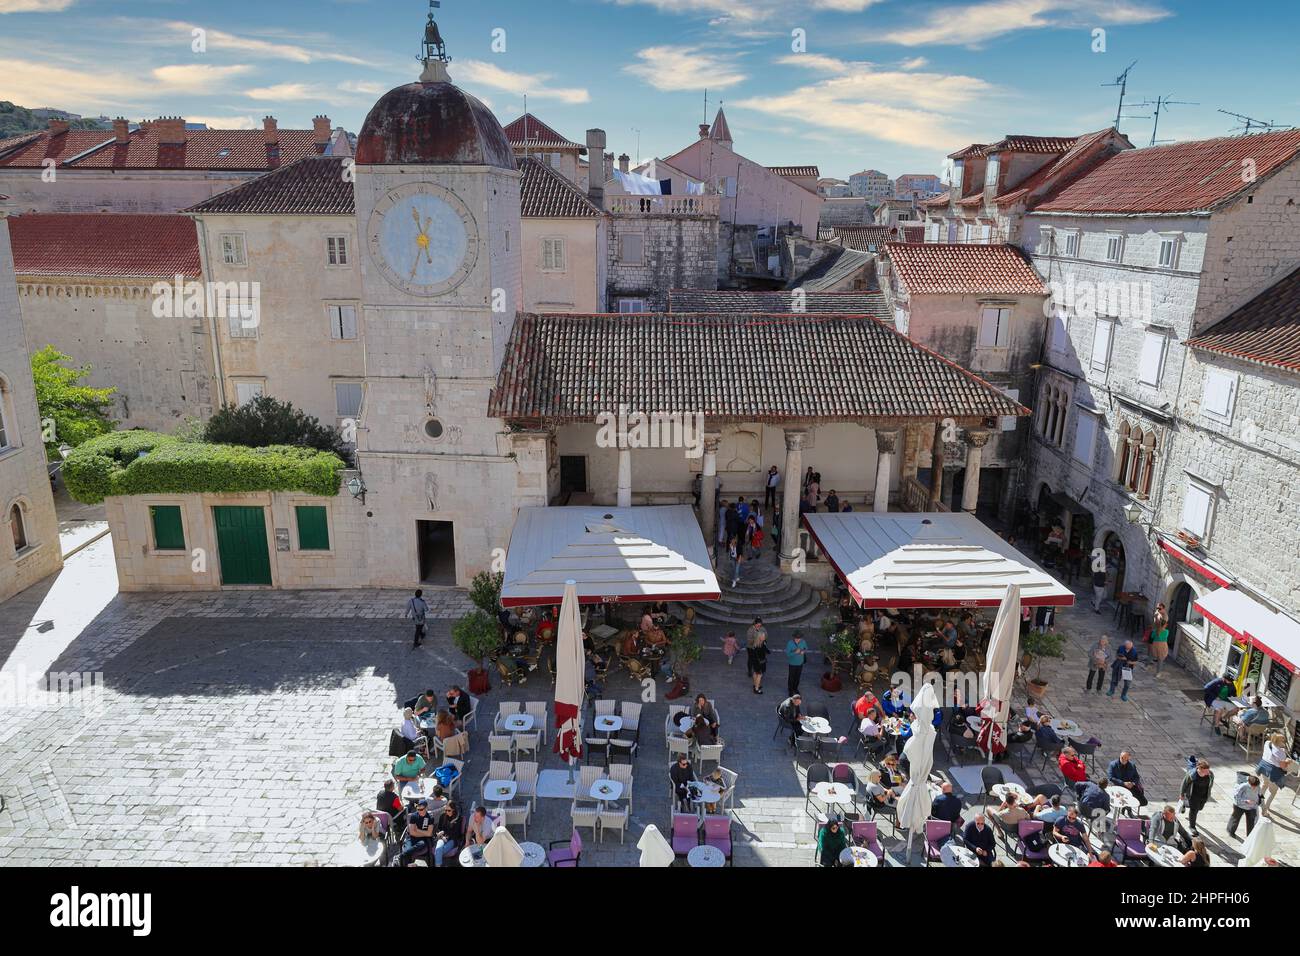 Trogir, Croatia - looking down on the square with its clock tower, town hall and cafes Stock Photo